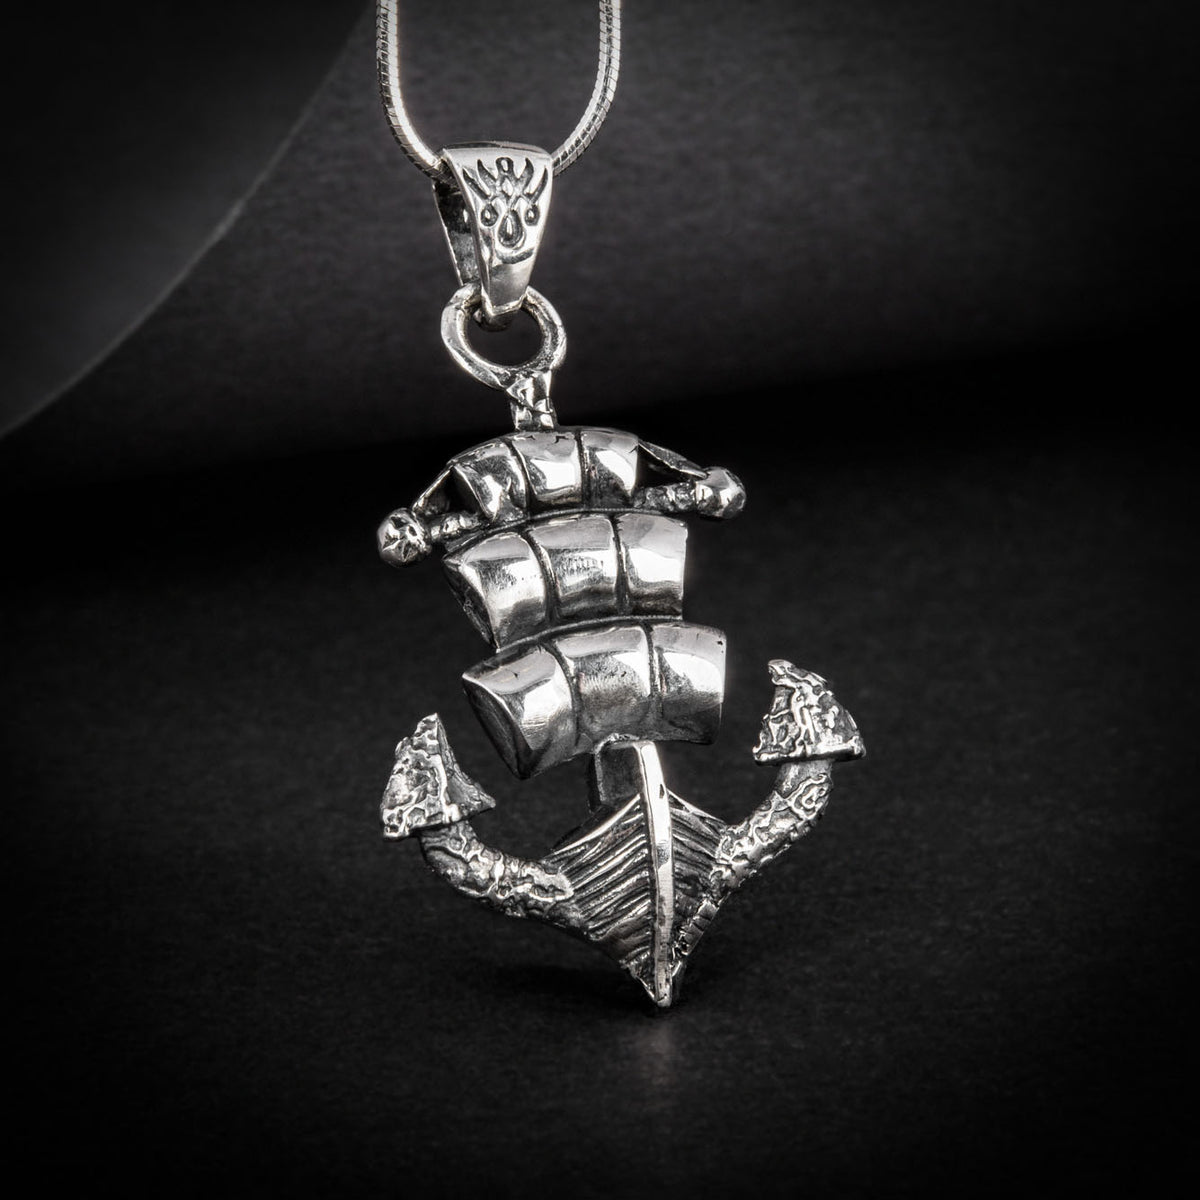 Square Sail and Anchor Silver Pendant close-up